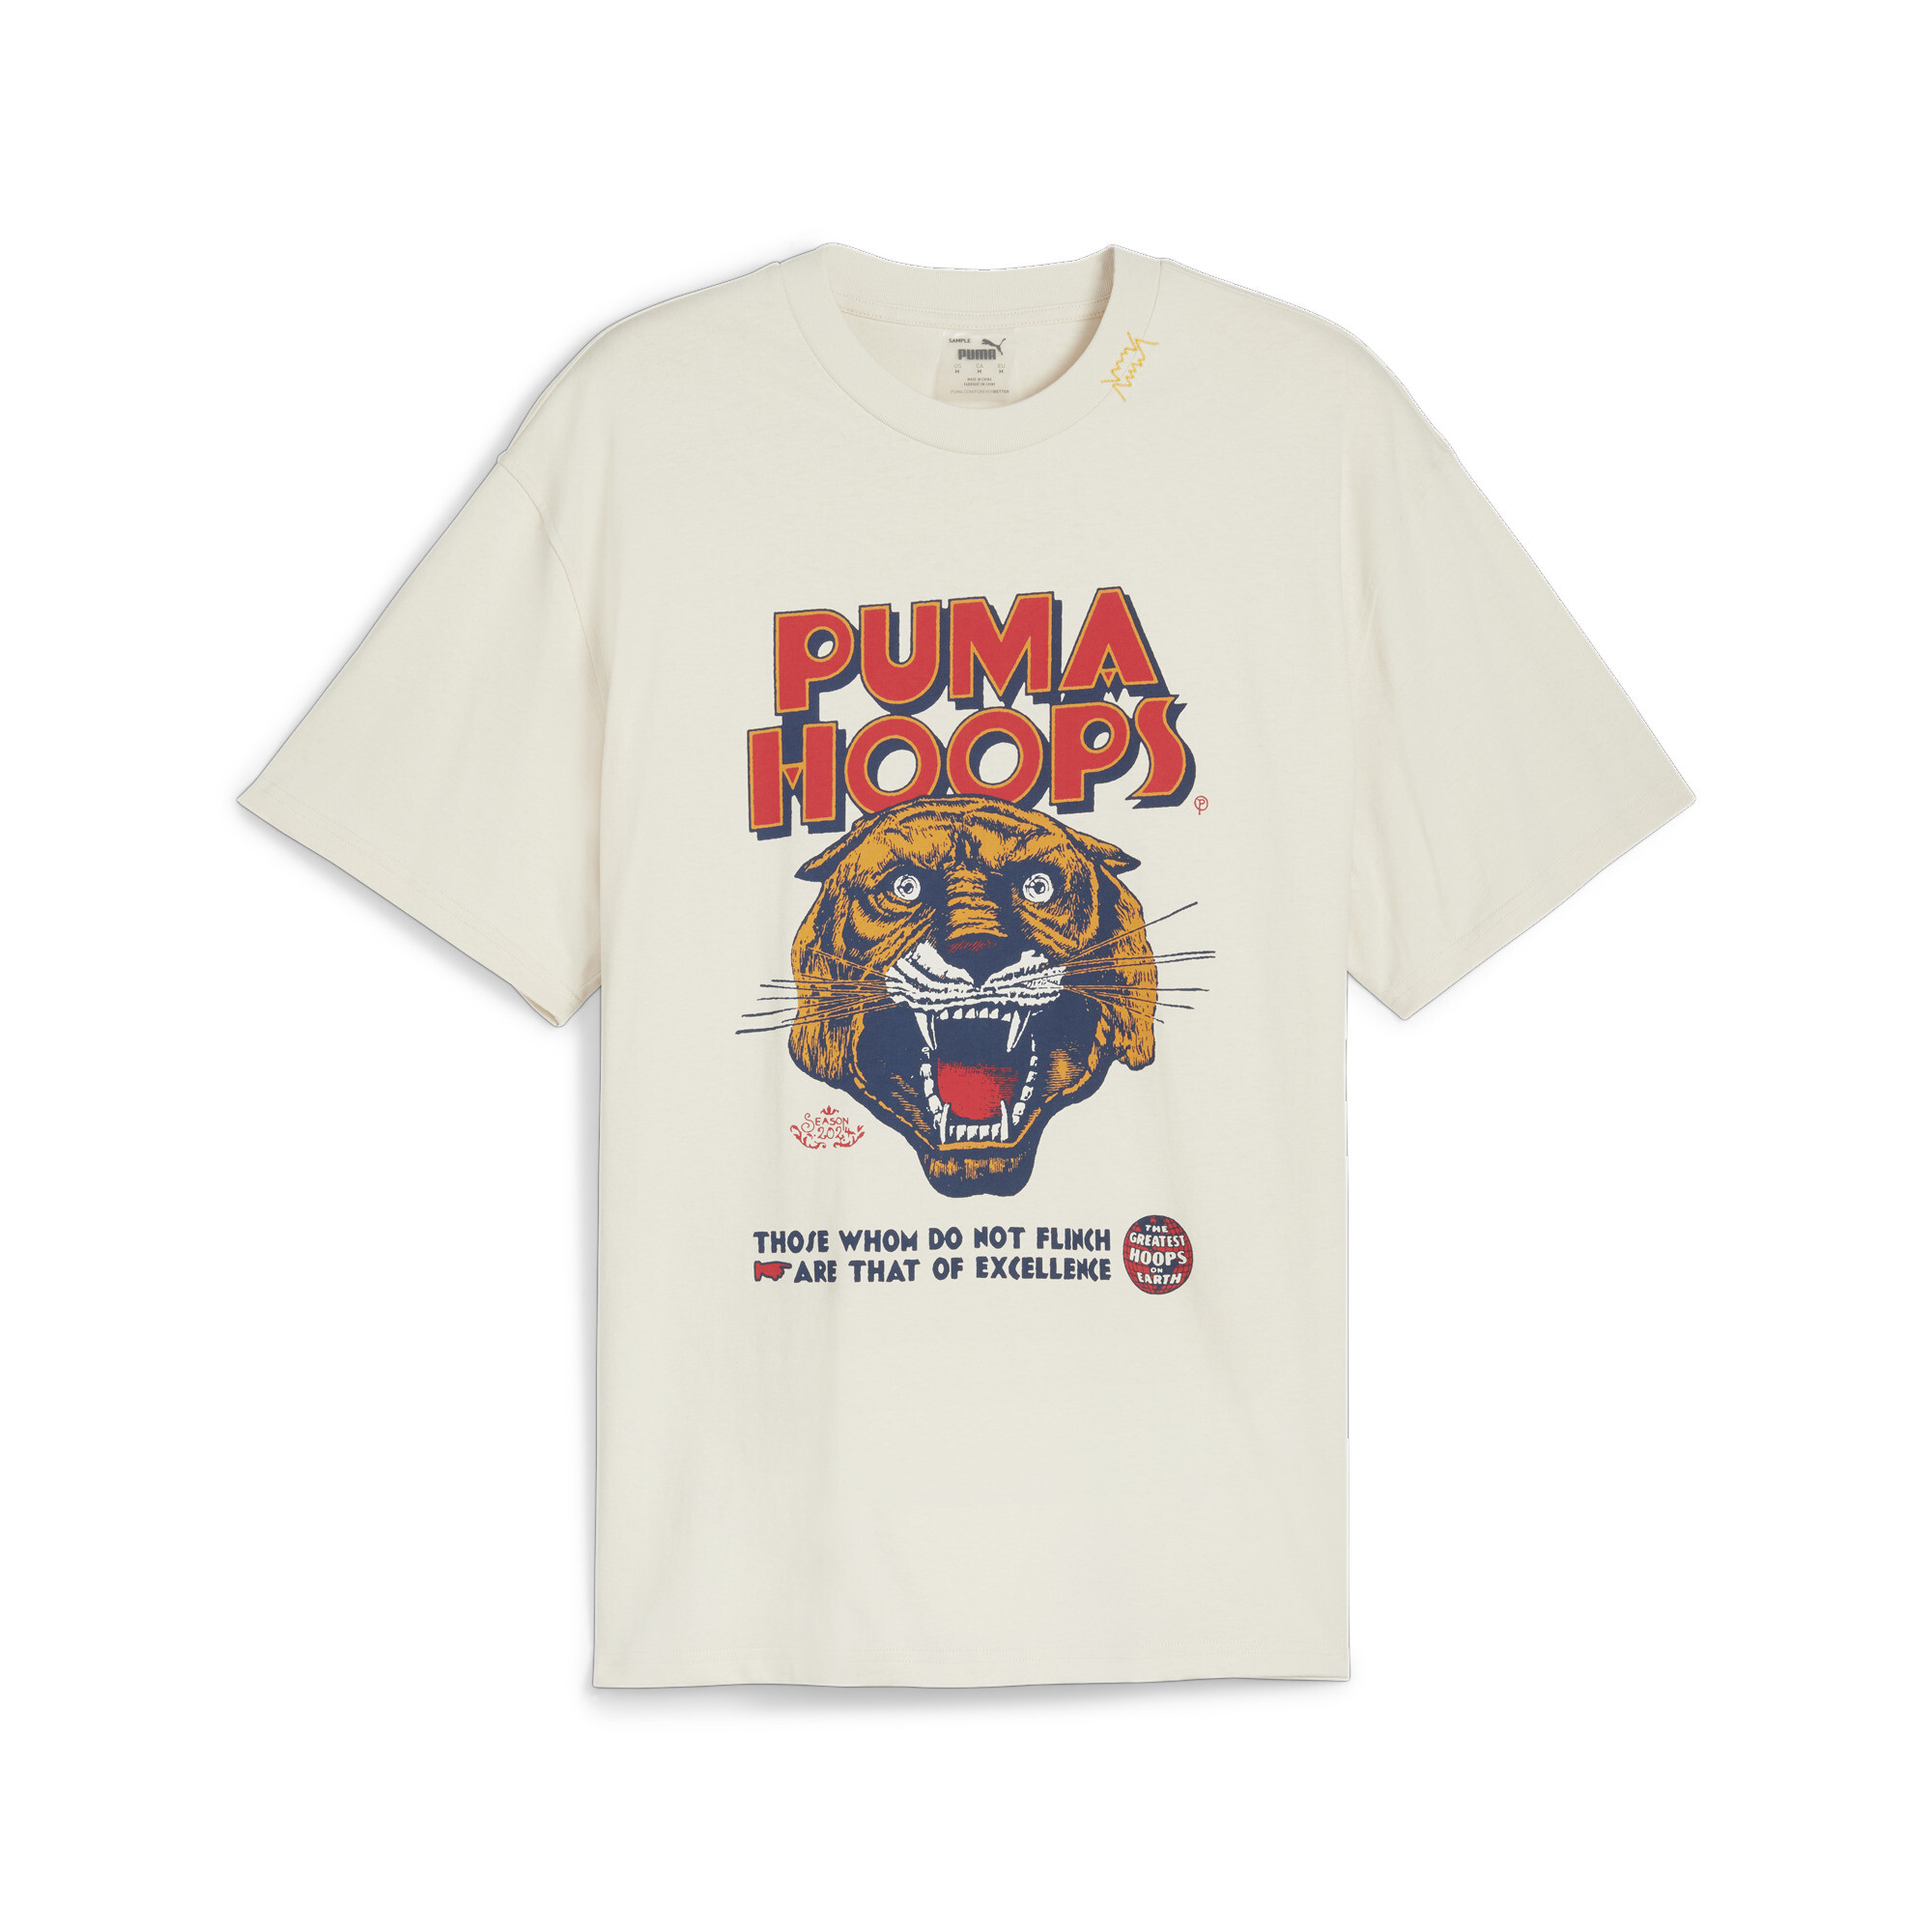 Men's PUMA HOOPS Showtime T-Shirt In White, Size 2XL